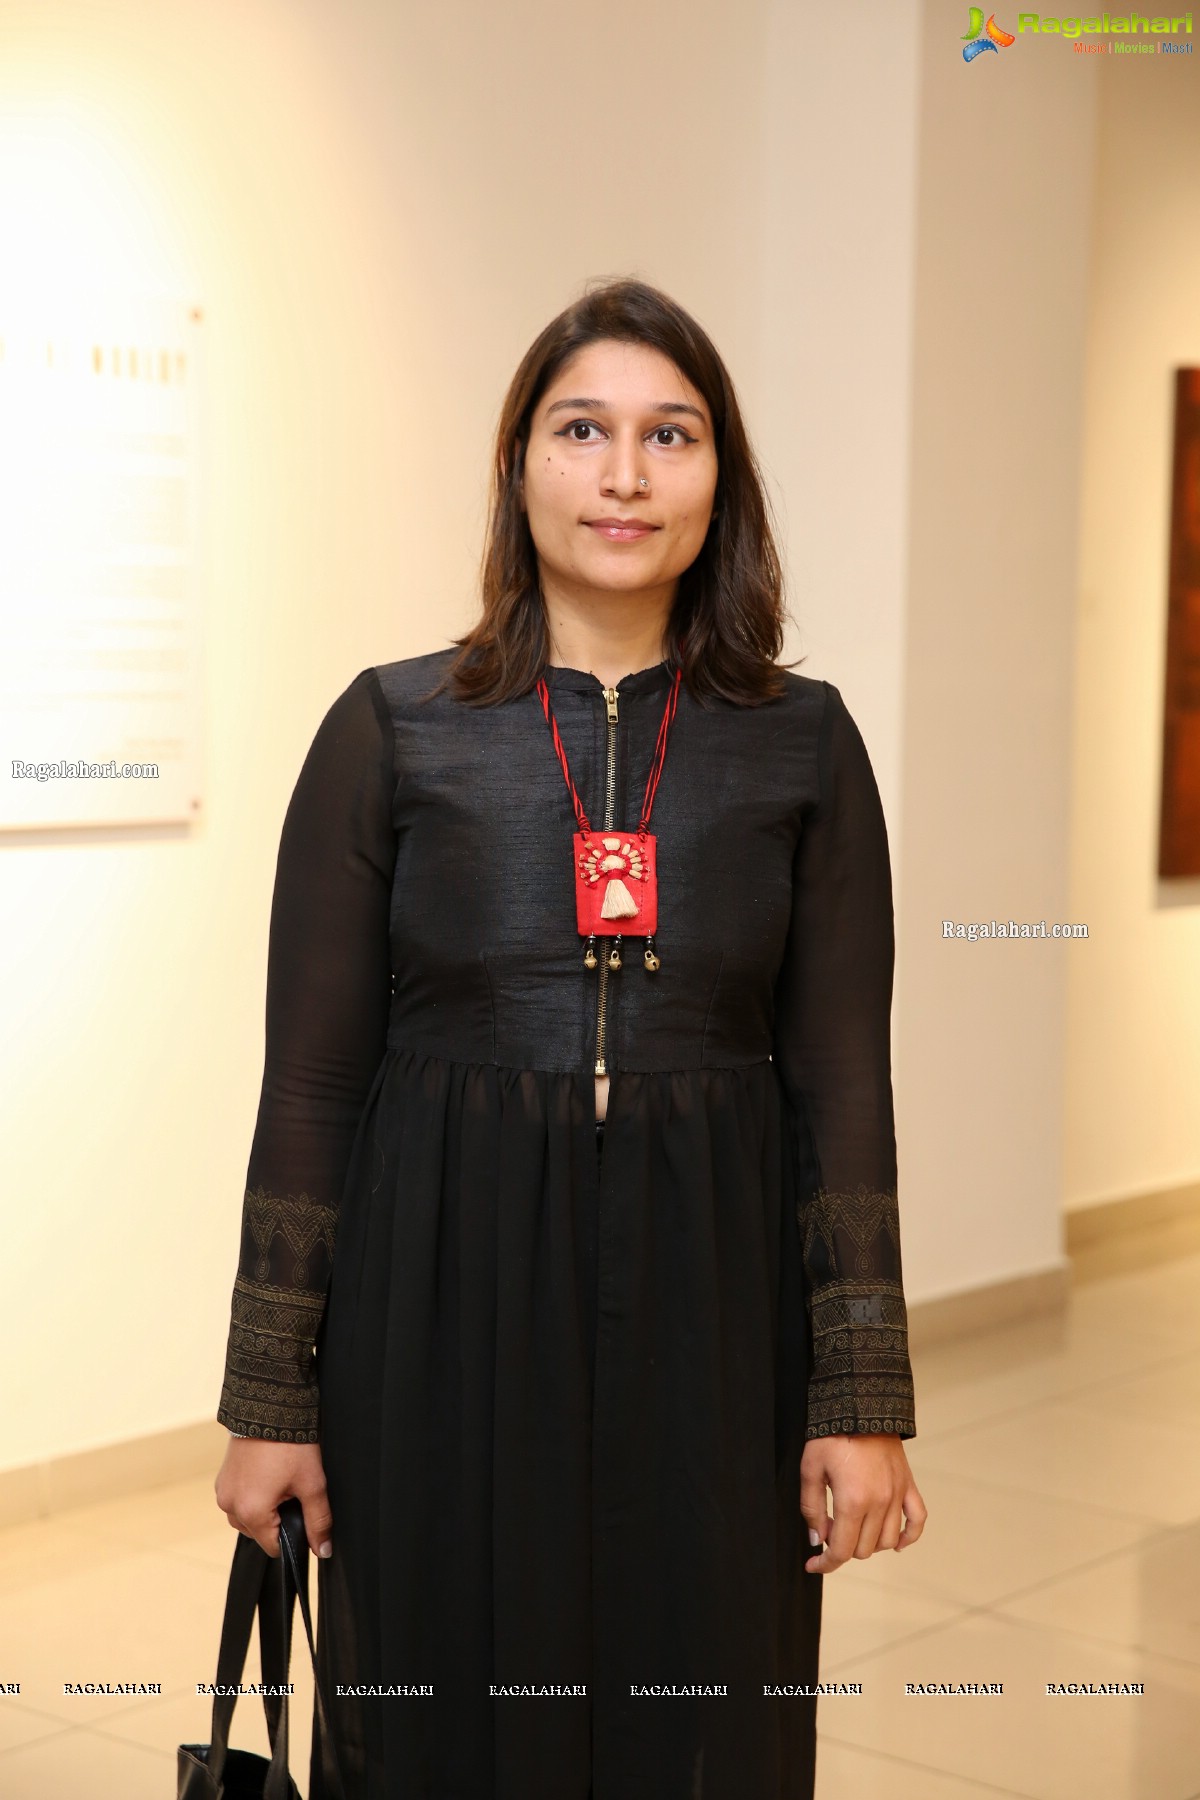 Chitramayee State Art Gallery February 2020 - Exhibition of Paintings